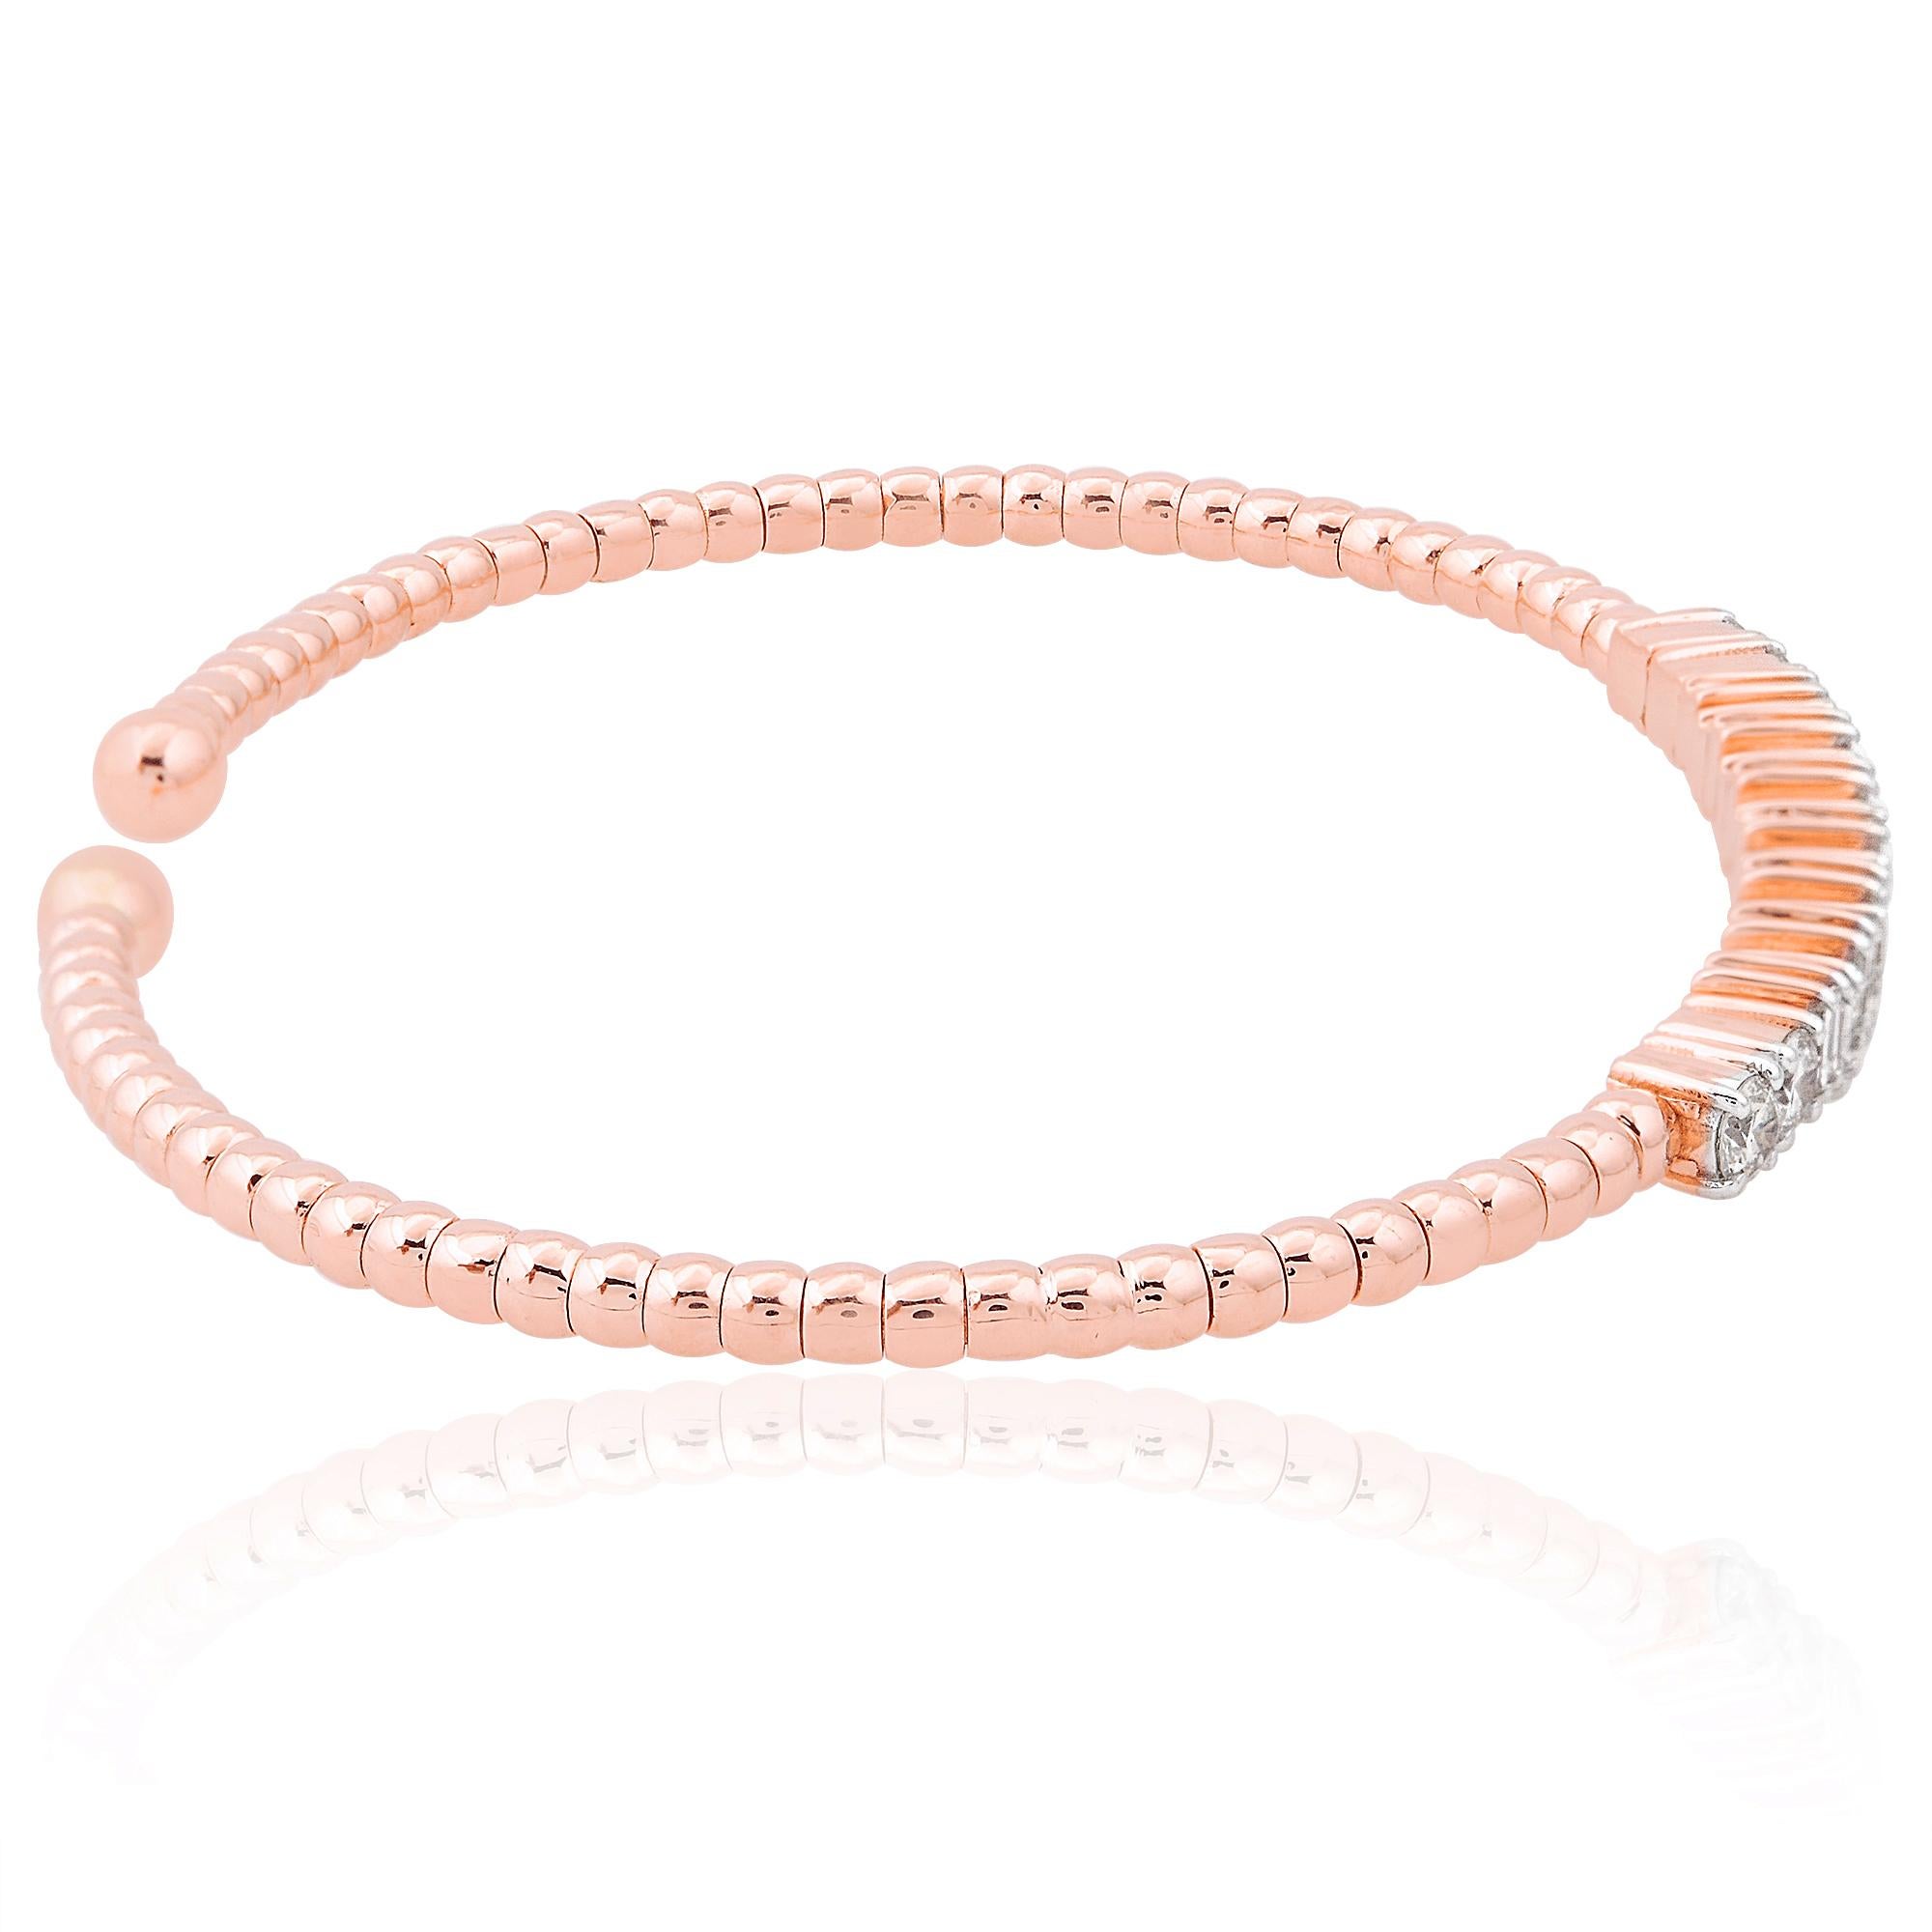 Crafted with the utmost attention to detail, the 18 Karat Rose Gold setting adds warmth and richness to the design, complementing the diamonds' radiance with its soft blush hue. The cuff bangle design offers a modern twist on traditional elegance,